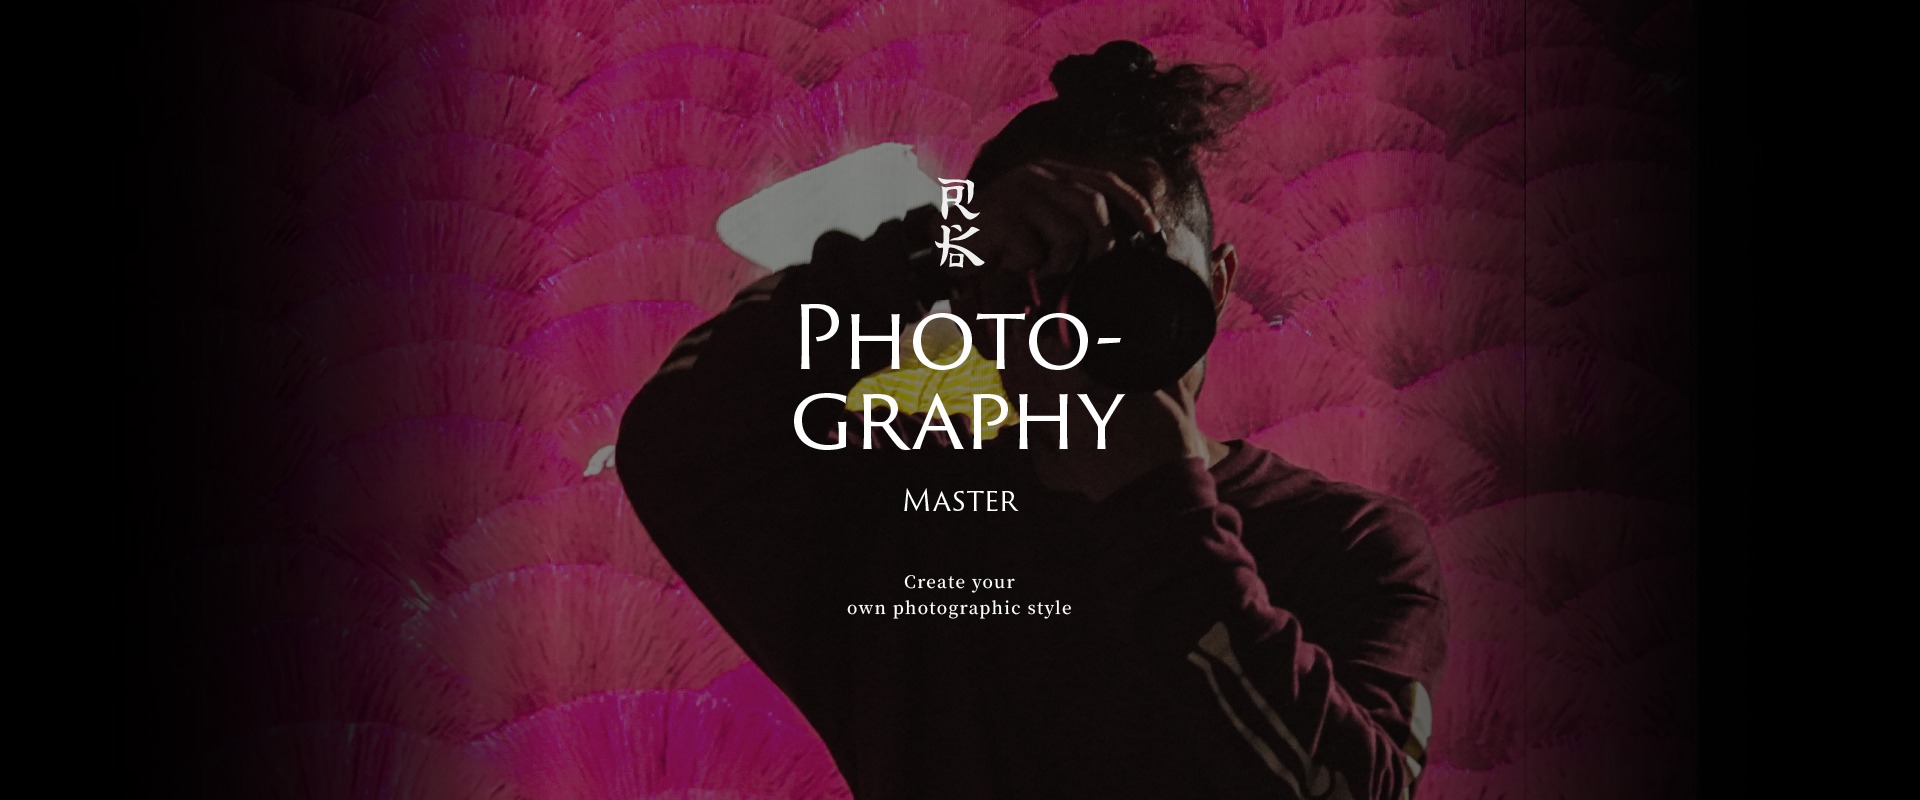 Master Class - Modern Image & Photo (Free Trial), master class